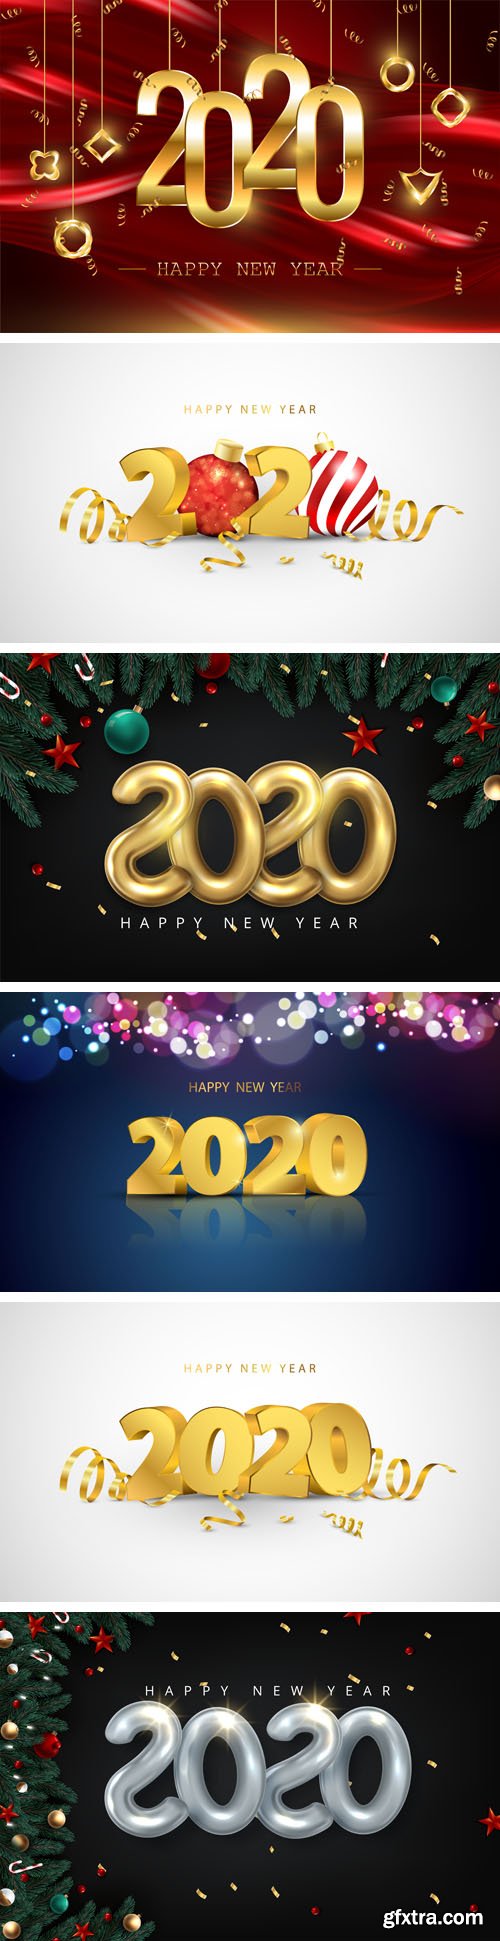 Happy New Year 2020 Vector Collection 1